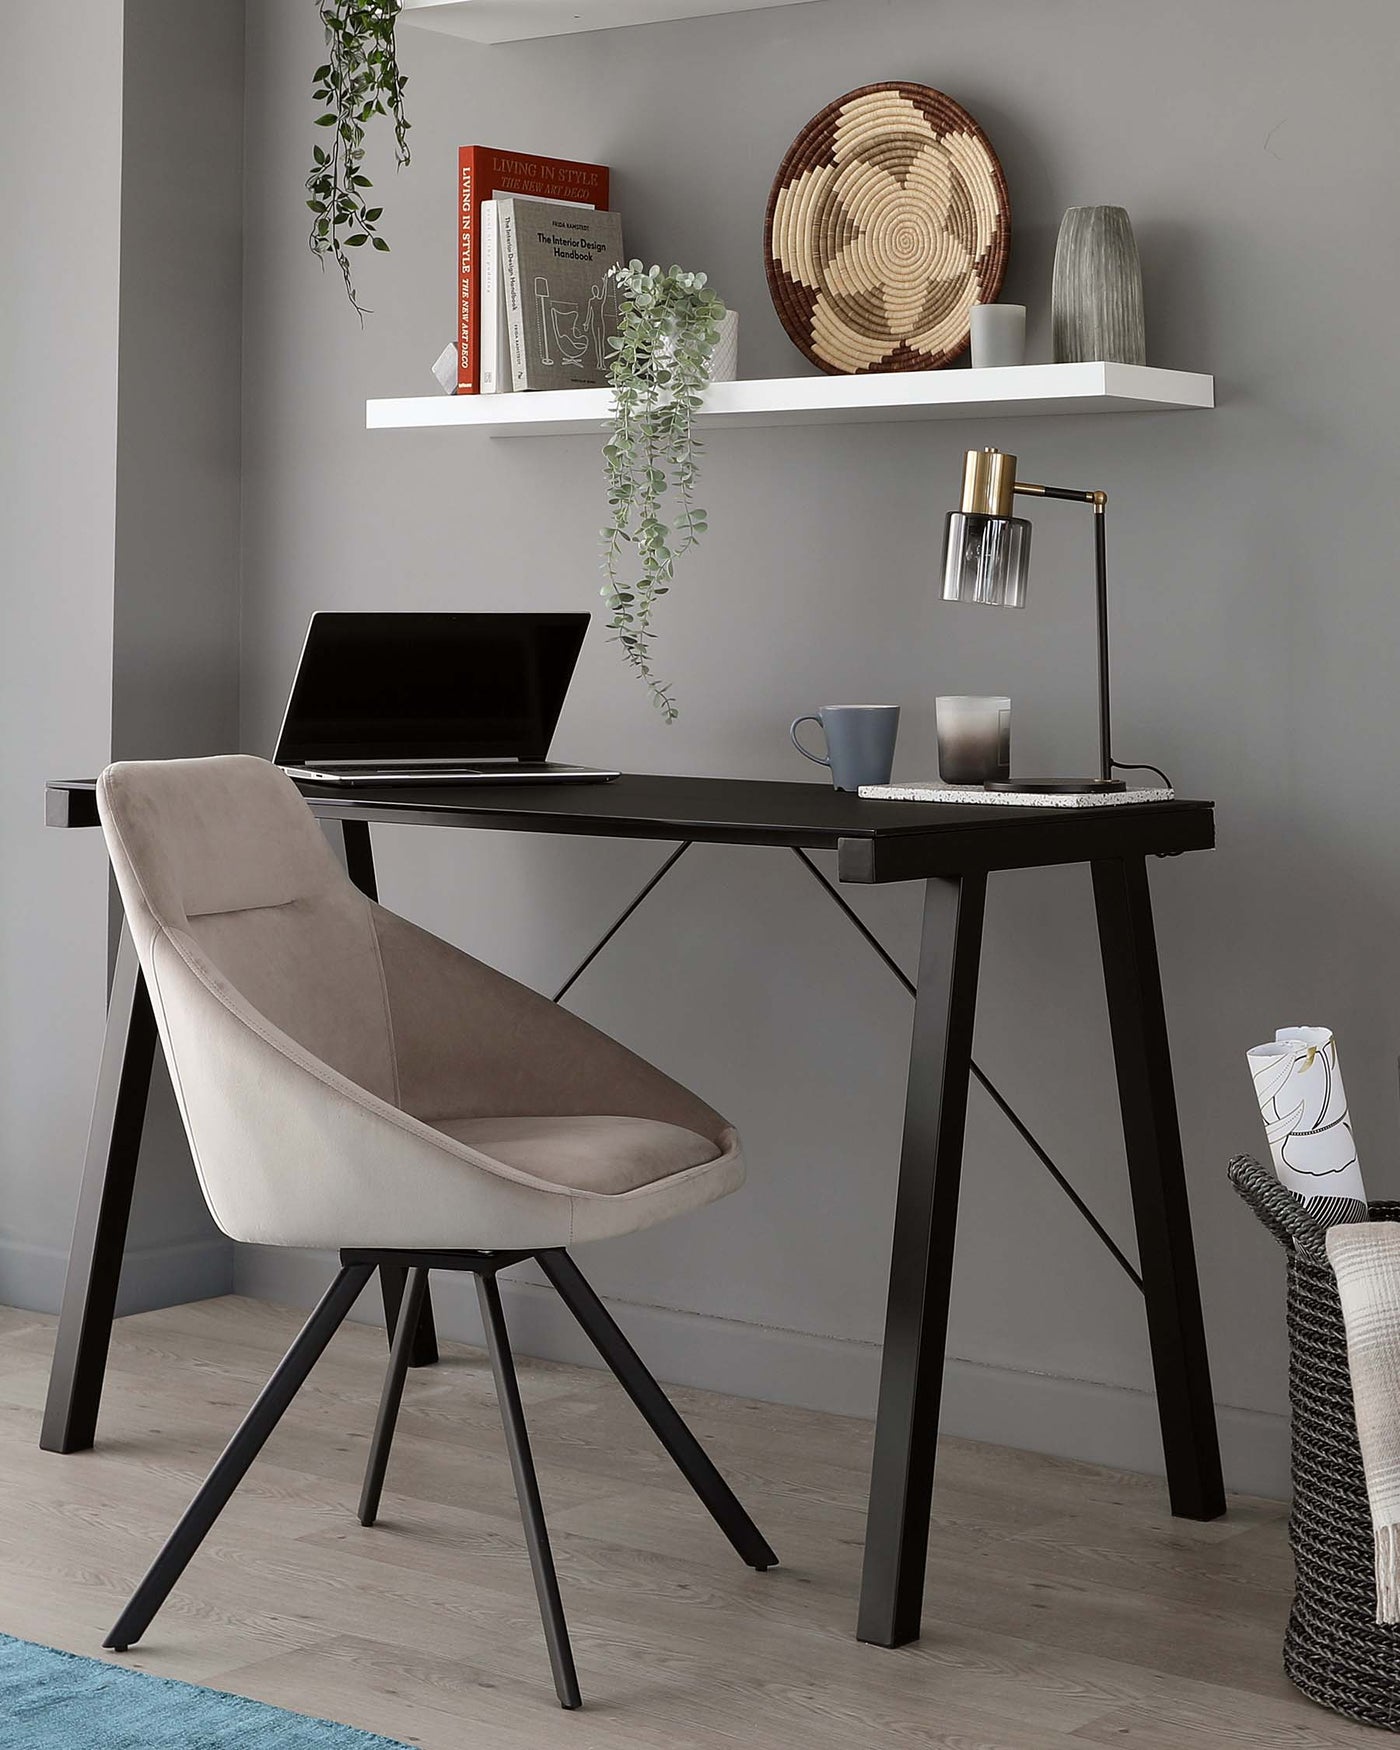 Modern home office setup featuring a sleek black desk with an A-frame leg design, paired with a plush, light taupe upholstered chair with a unique open-back and four angled legs. A white floating shelf with decorative items is mounted above.